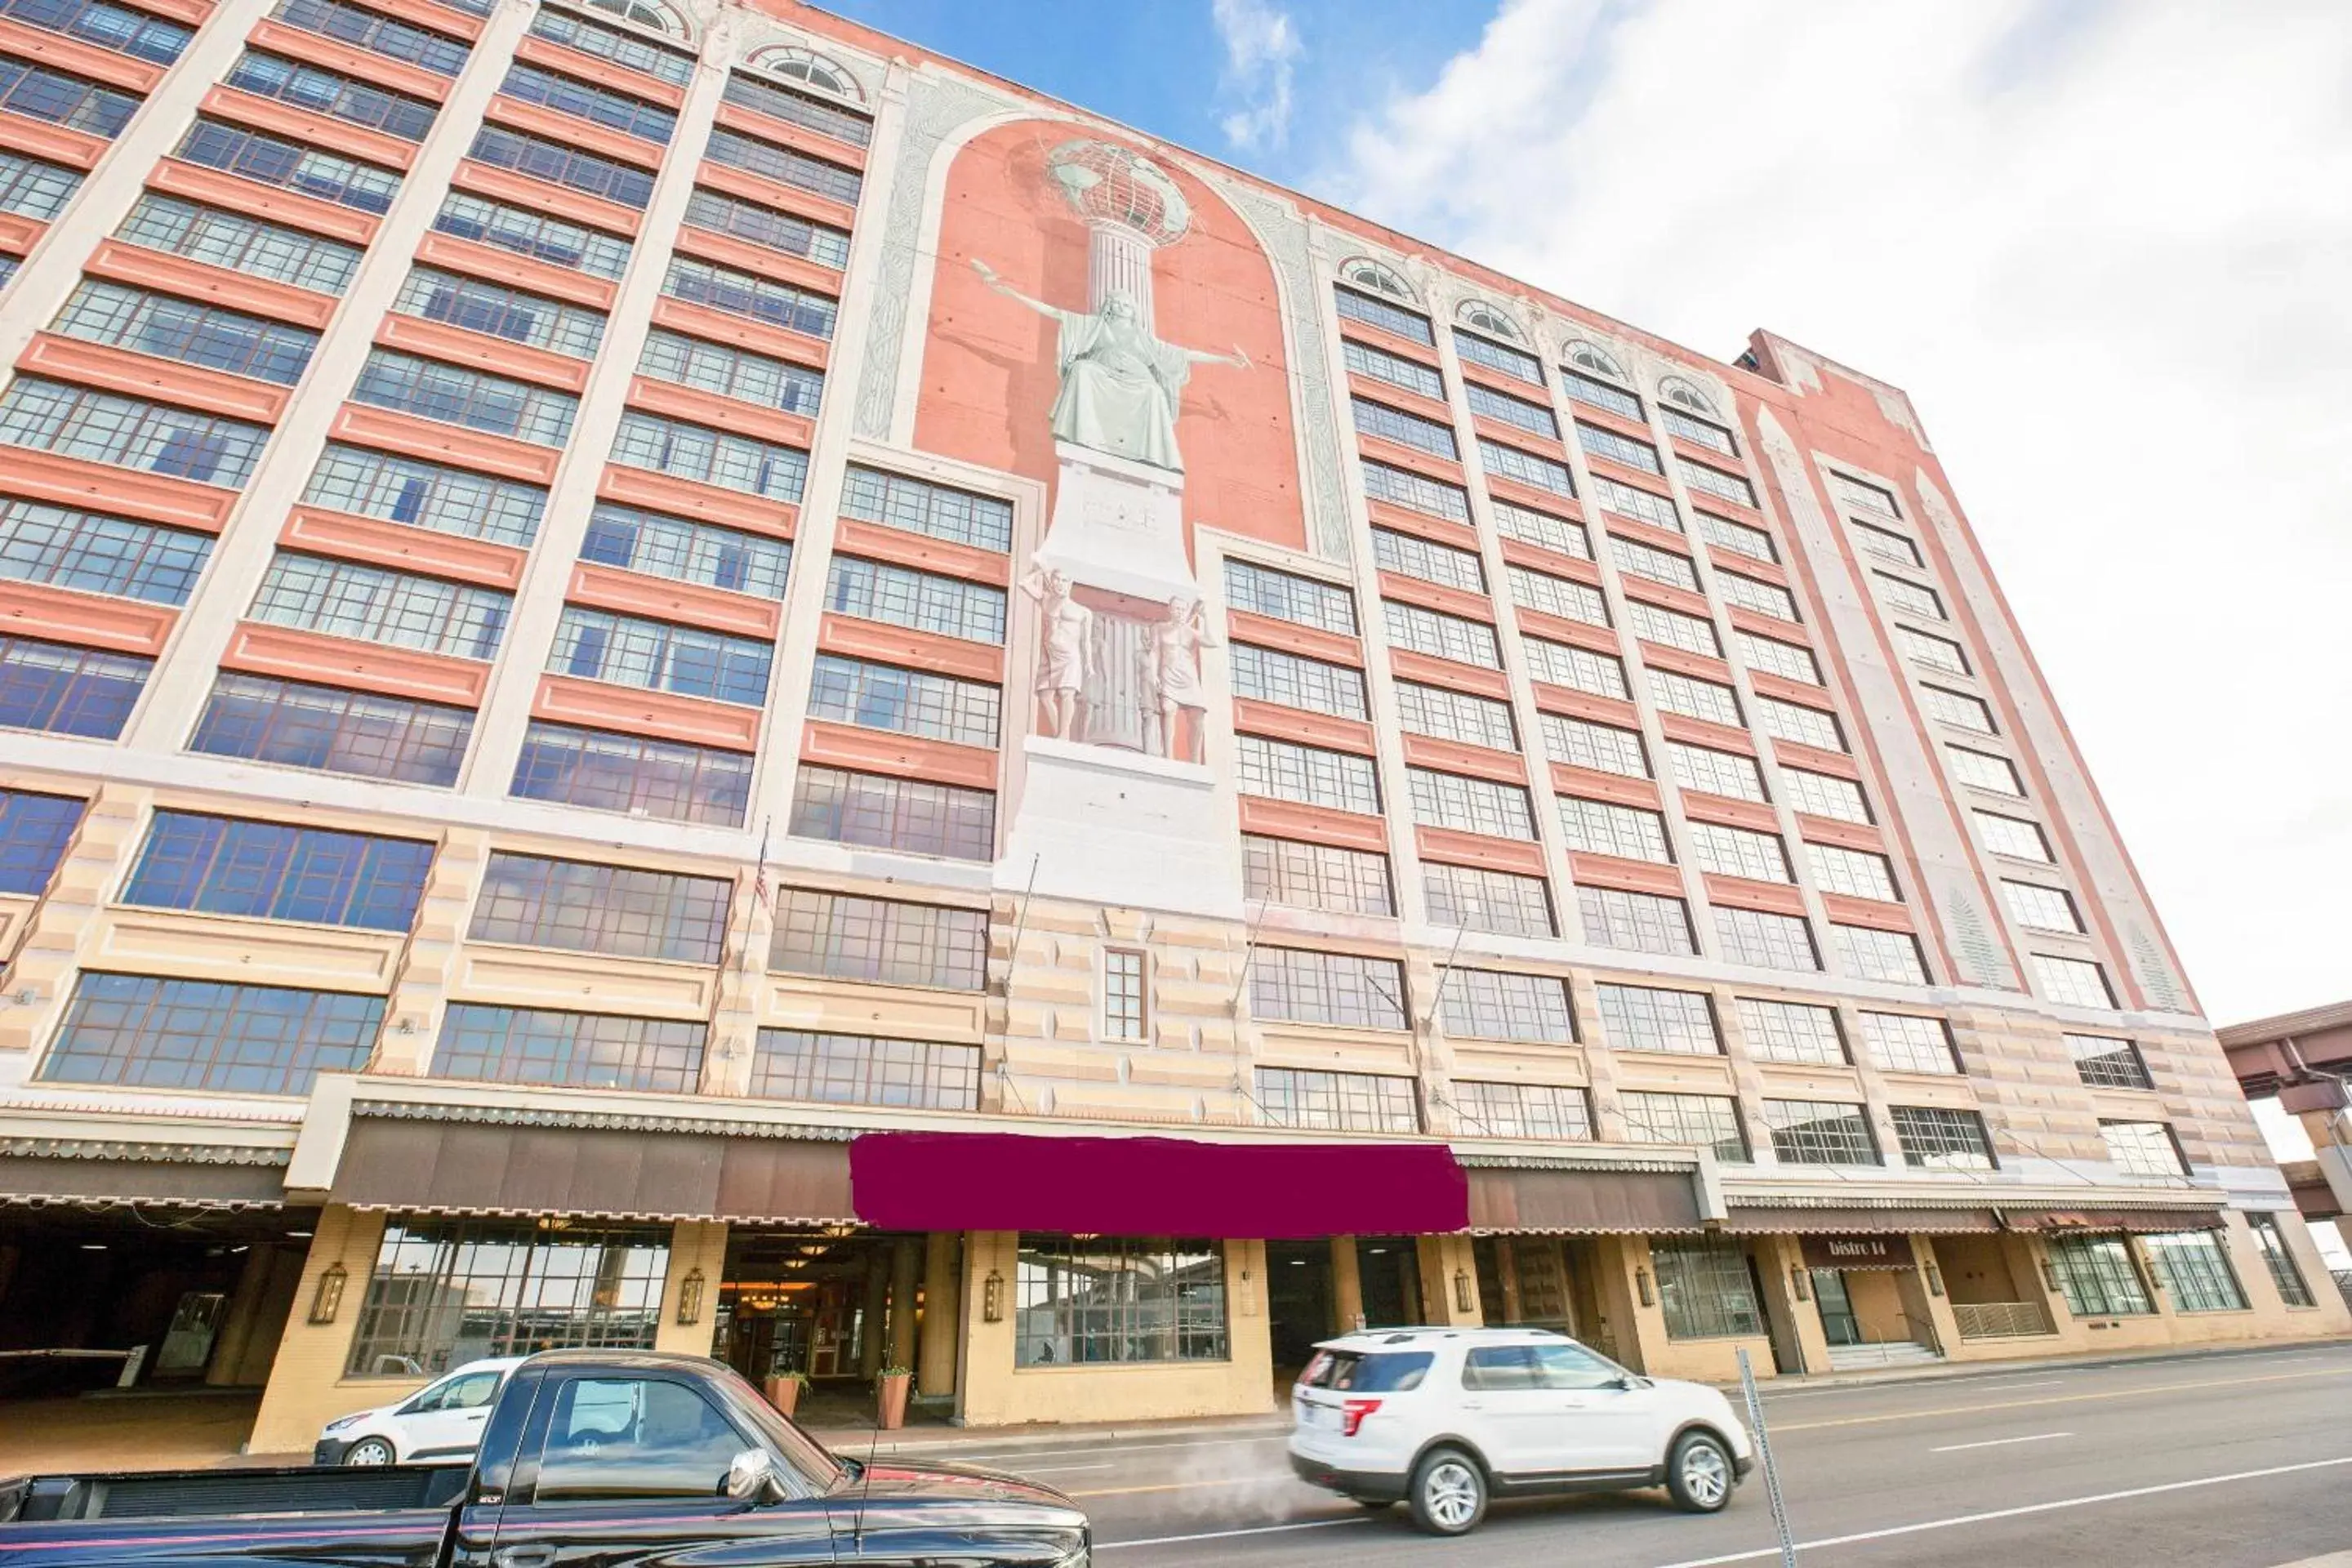 Property building in OYO Hotel St Louis Downtown City Center MO